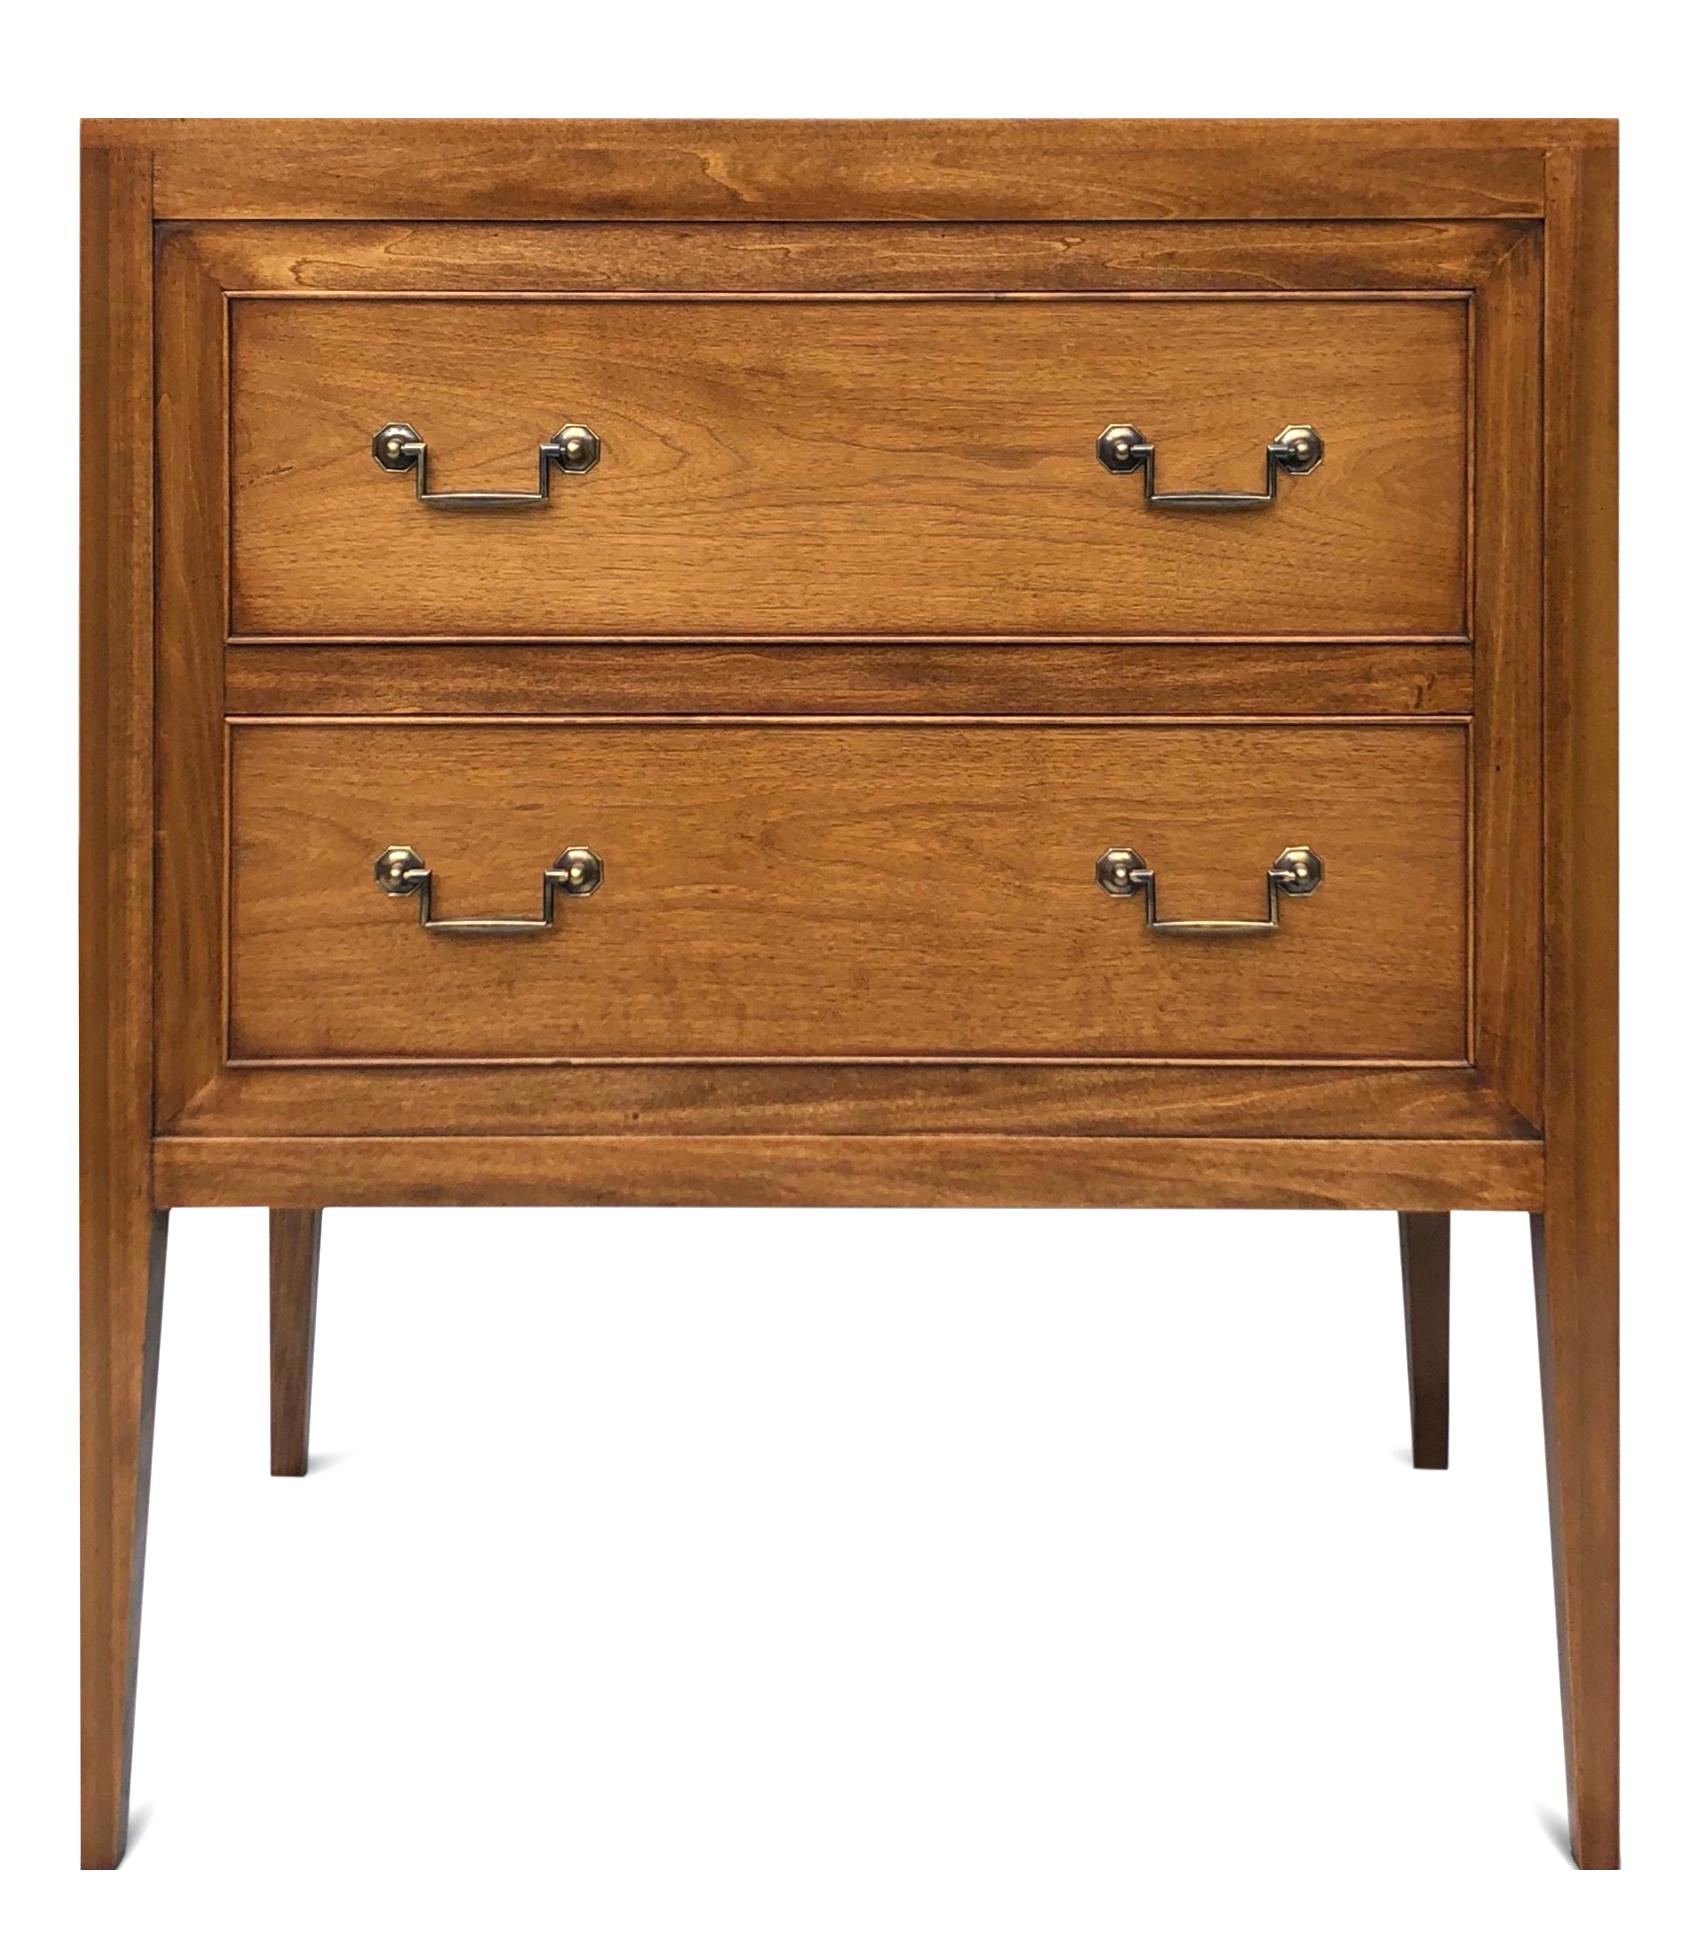 A pair of modern two-drawer walnut chests.
Manufactured by Garners, (Est 1966)
The tops with matching striped grains & fine bead. Two beaded drawers resting on slender tapering legs. Squared brass handles. Antique straw finish.

Various finishes